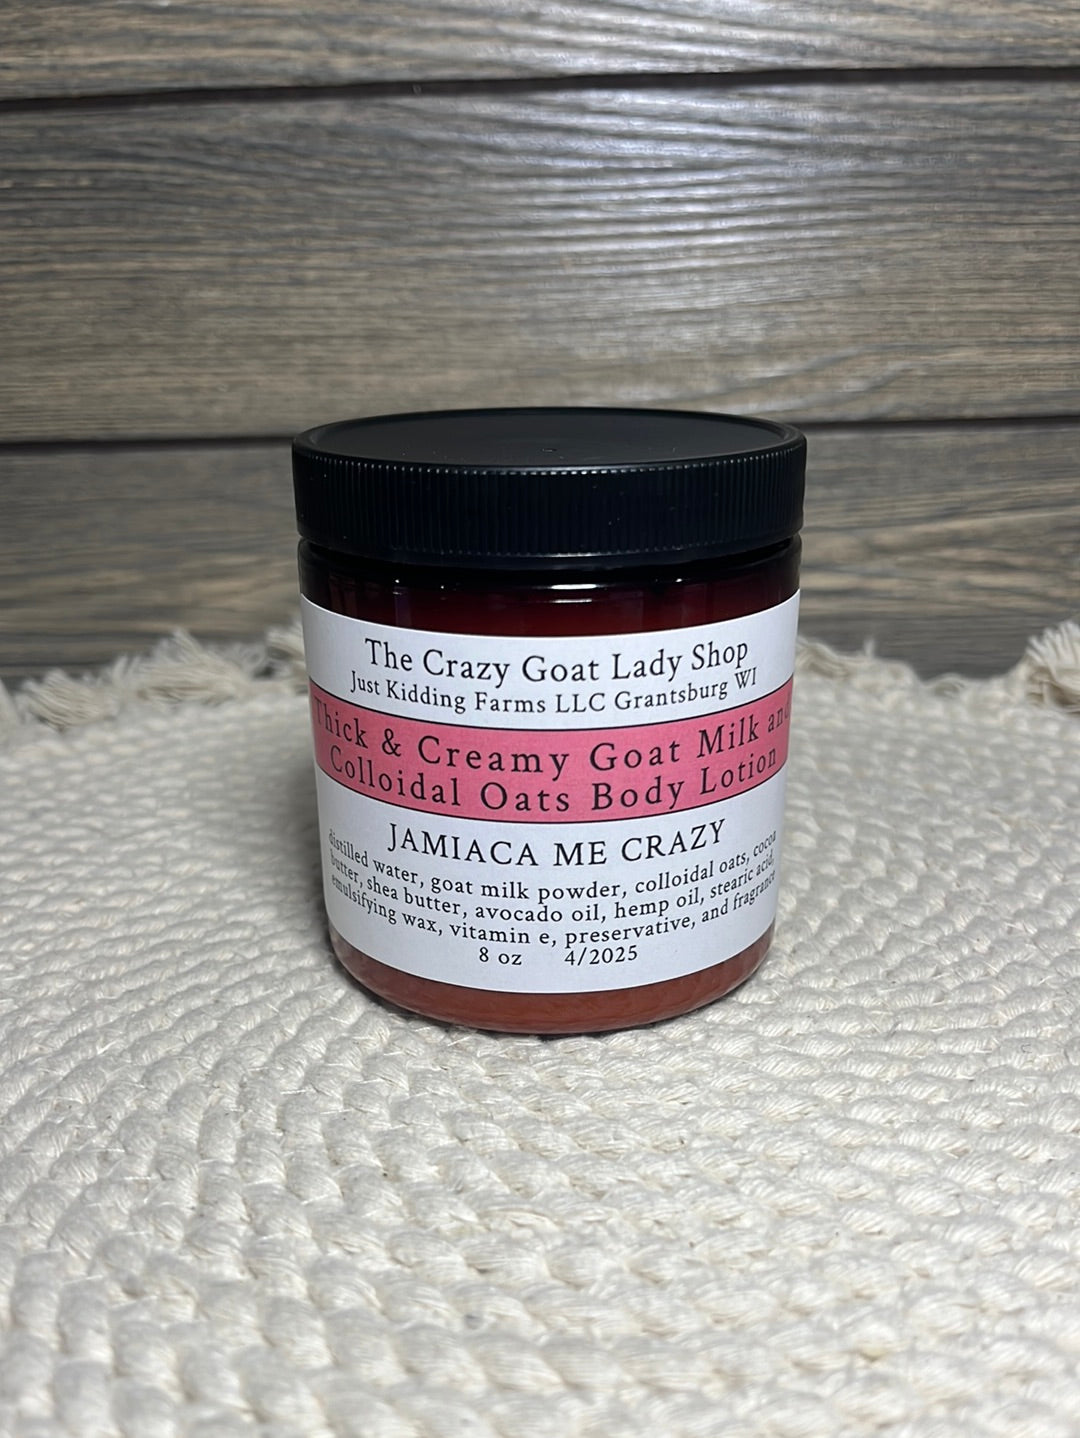 Thick & Creamy Goat Milk and Colloidal Oatmeal Body Lotion ~ Jamaica Me Crazy